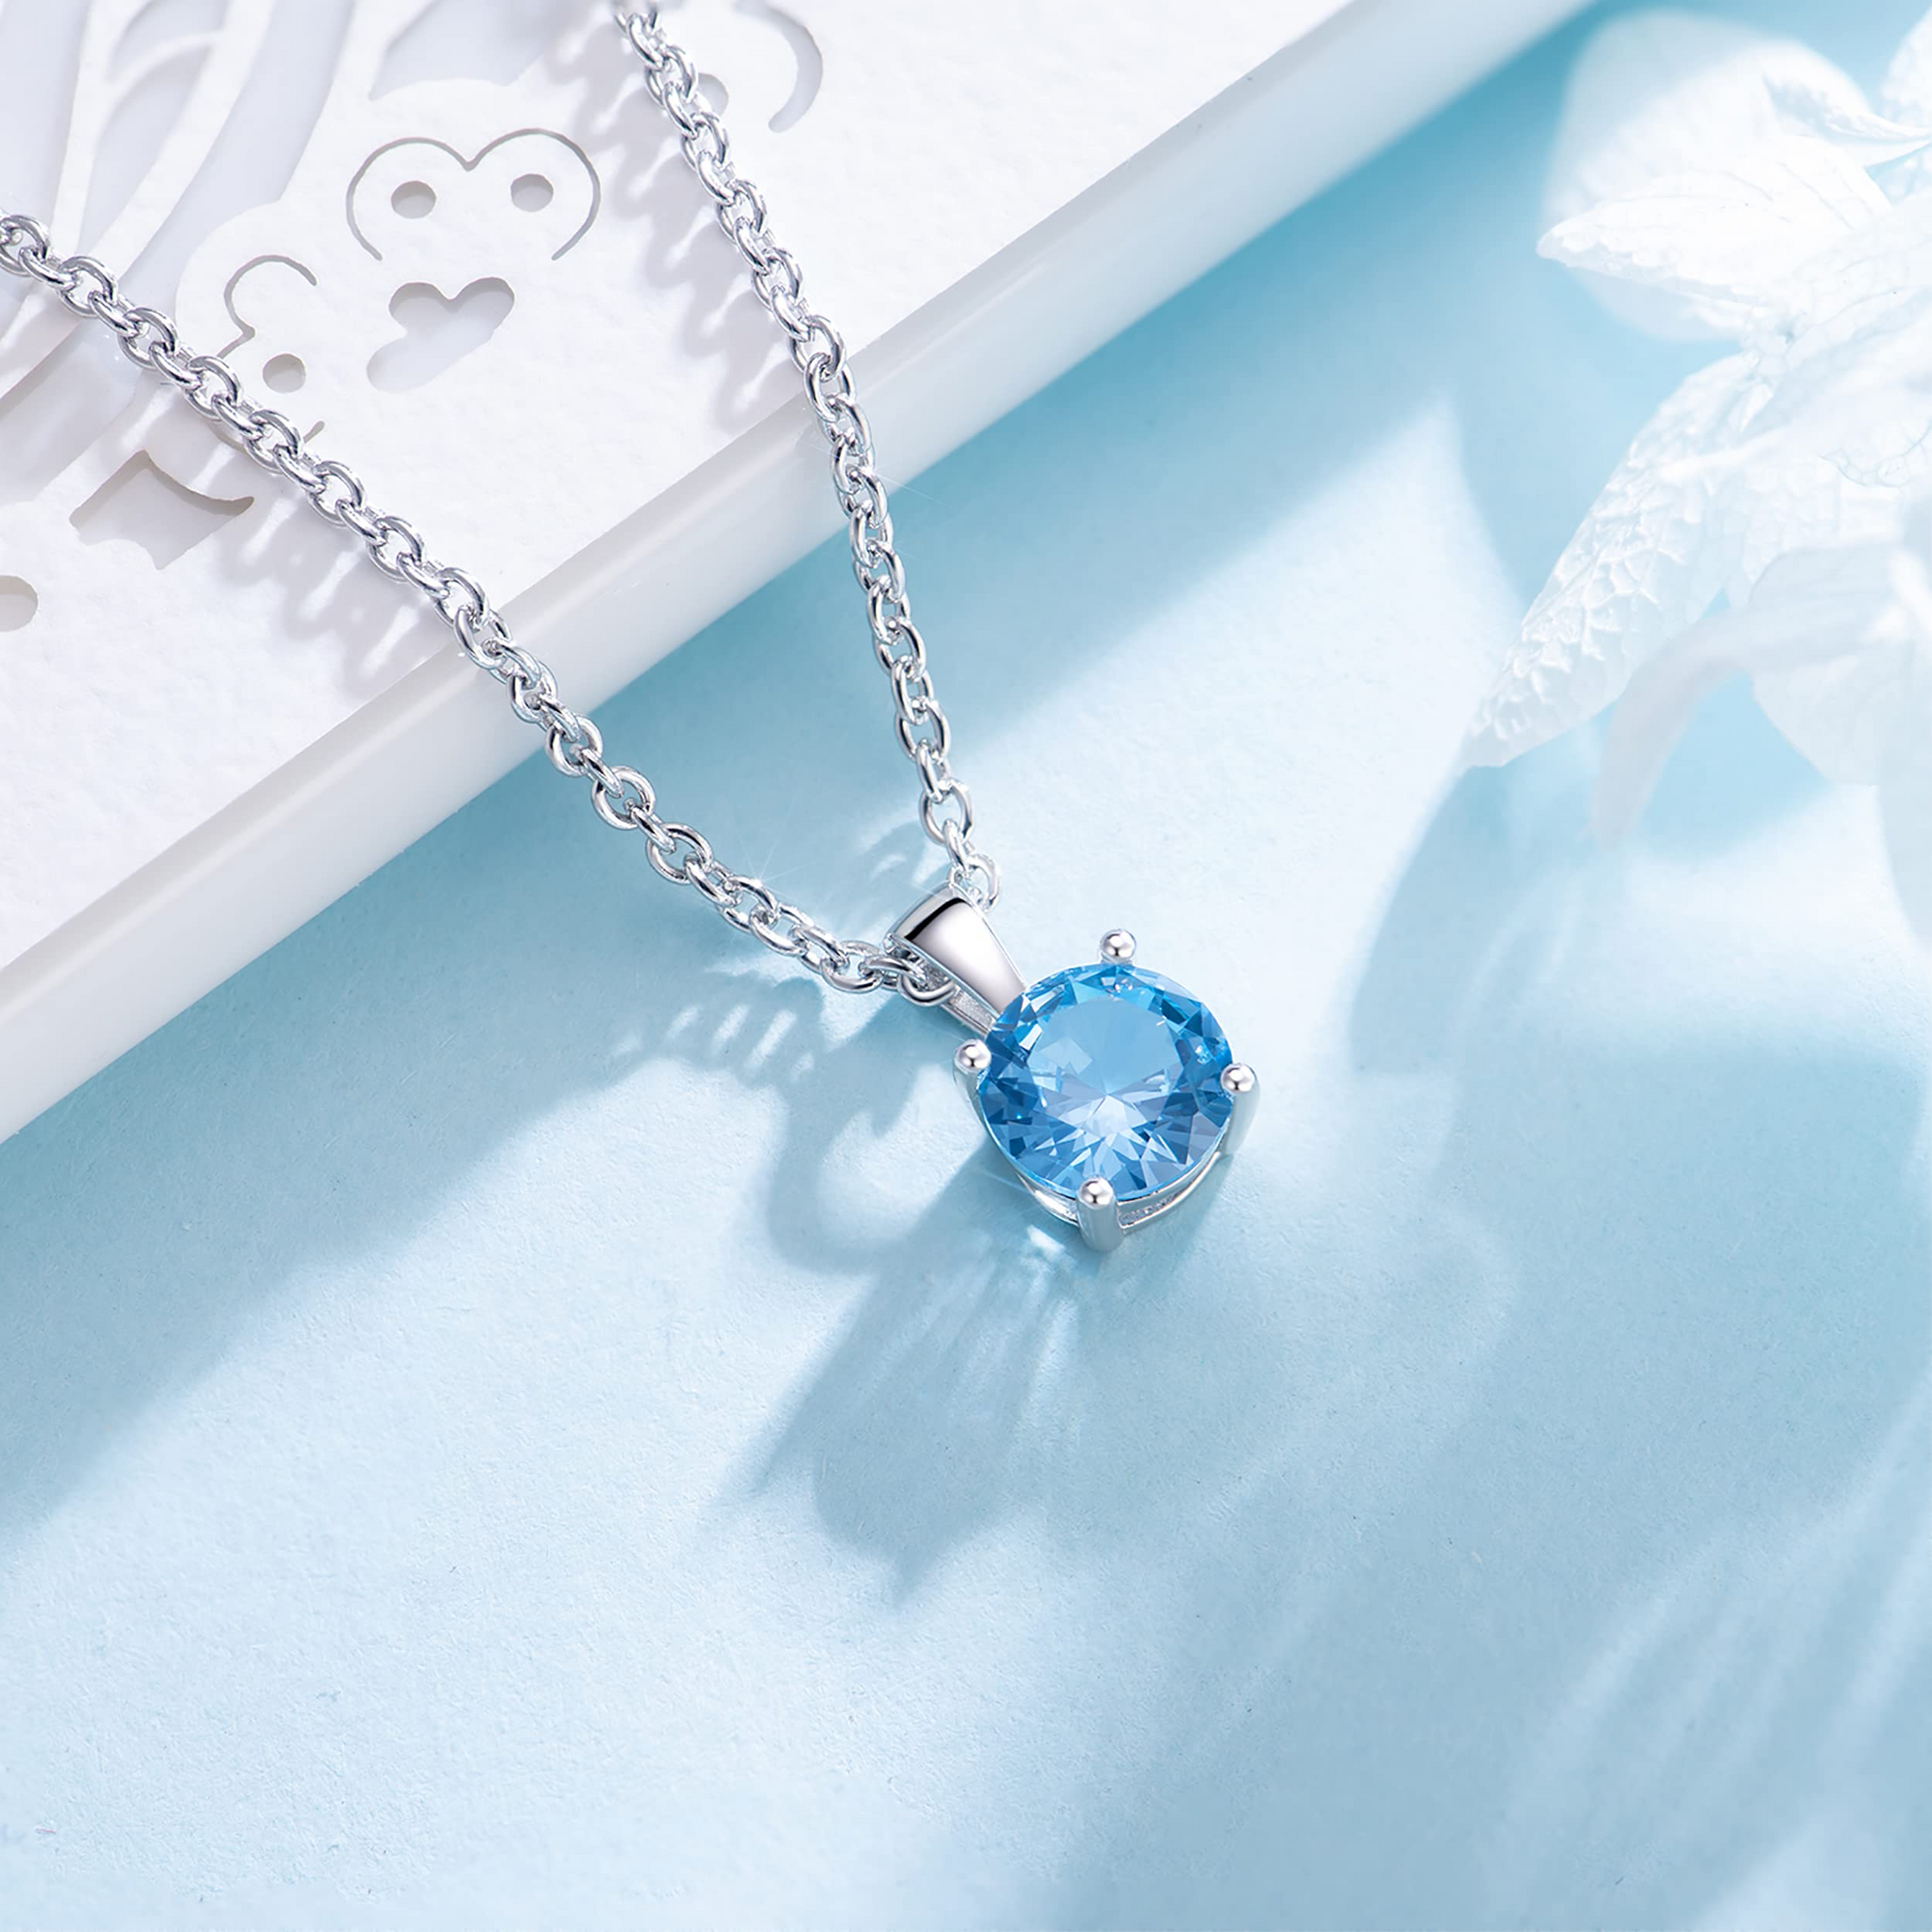 925 Sterling Silver Dainty Necklace with Aquamarine-Topaz-Blue Created-Spinel Pendant, Hypoallergenic Necklace, Everyday Wear Jewelry, Trendy Fashion Stylish Jewelry Birthday Gift for Women and Girls